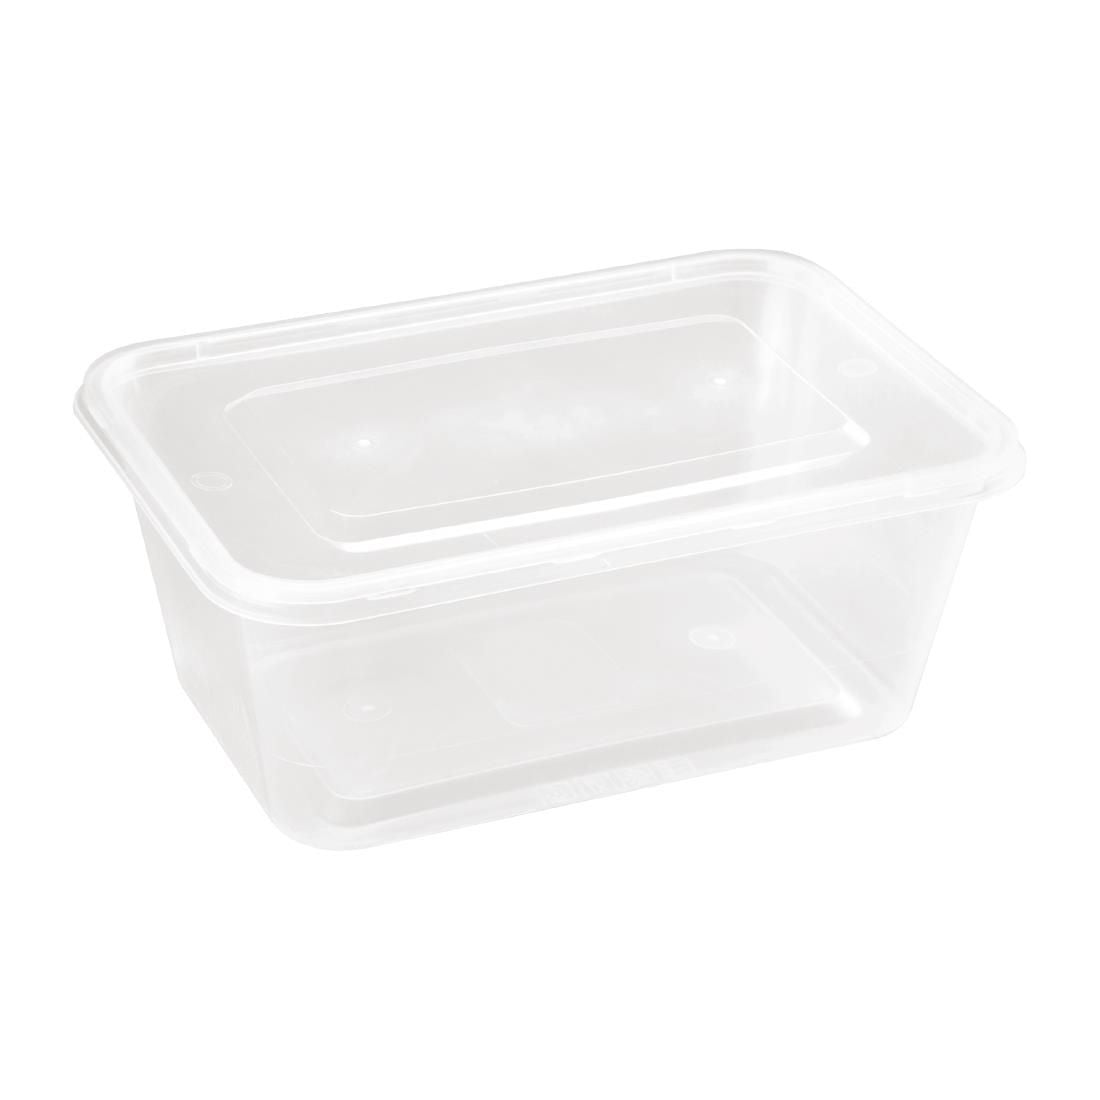 Fiesta Plastic Microwavable Containers With Lid Large 1000ml (Pack of 250) - DM183 Takeaway Food Containers Fiesta   